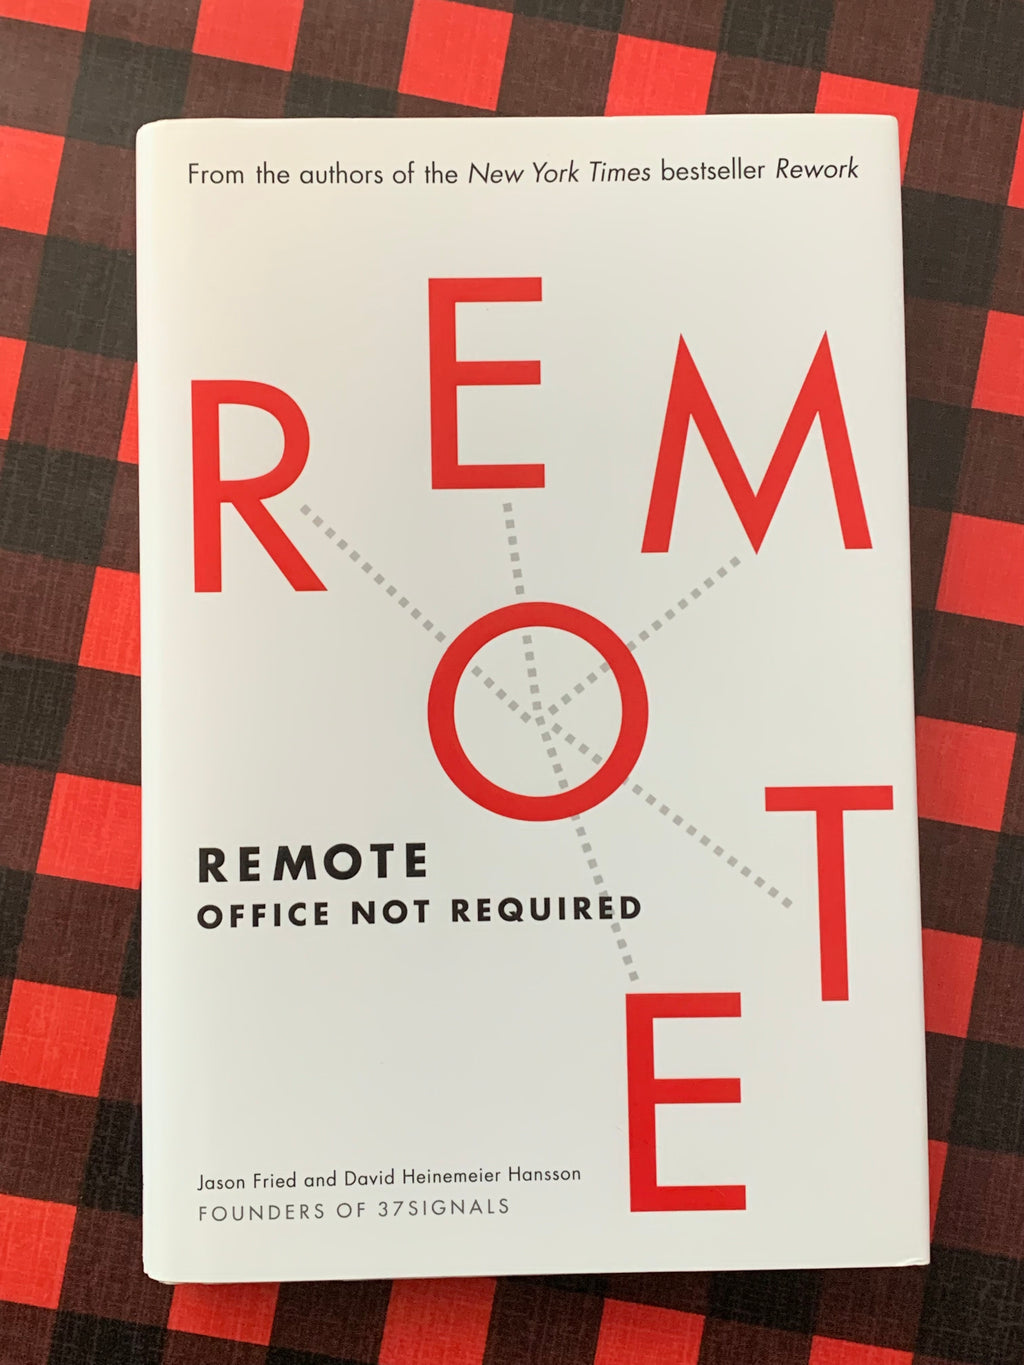 Remote: Office Not Required- By Jason Fried and David Heinemeier Hansson